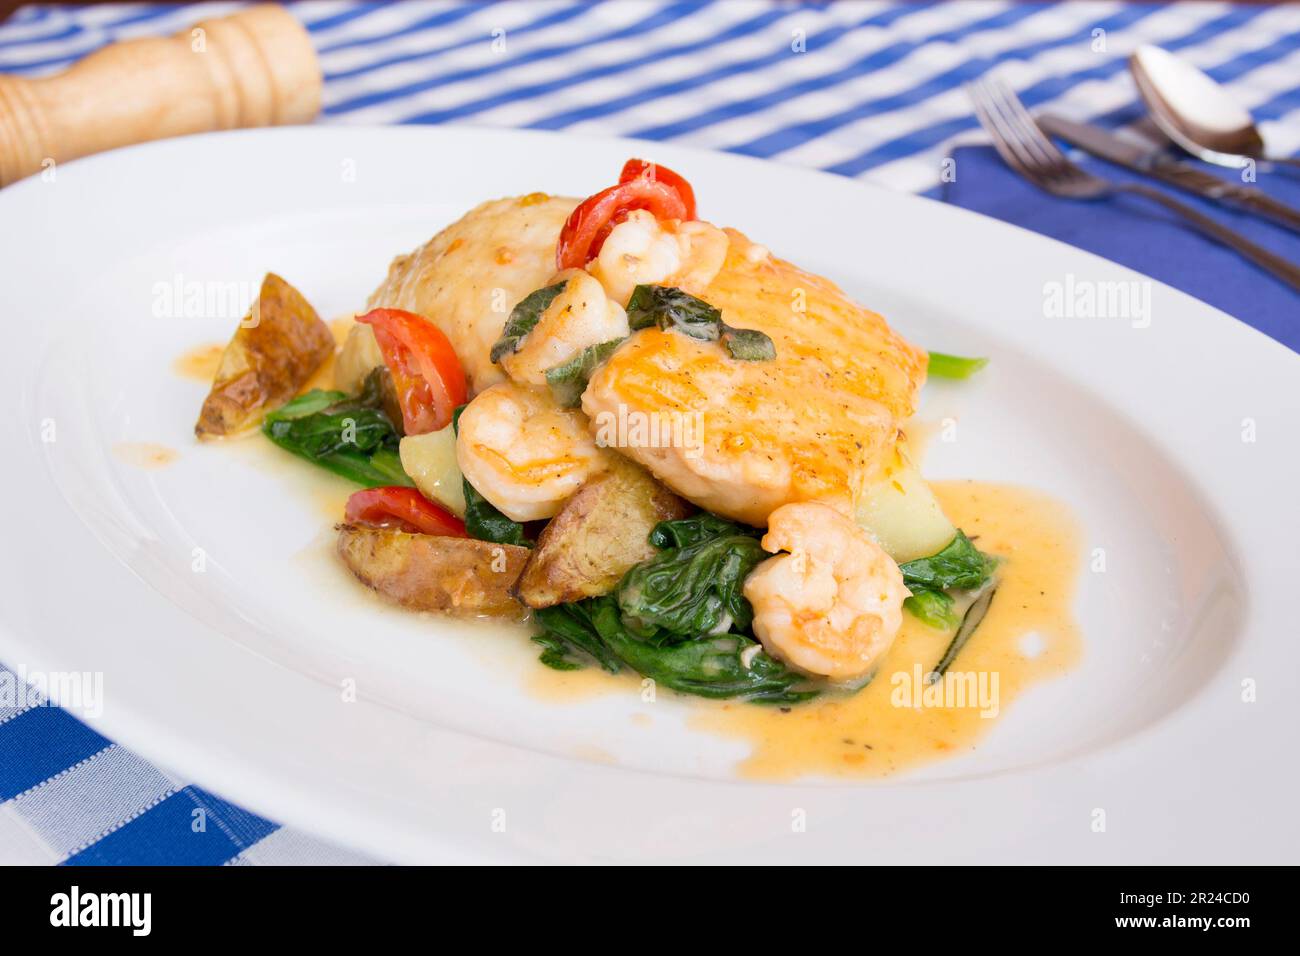 Premium monkfish dish cooked in the oven with vegetables in a luxury restaurant. Stock Photo